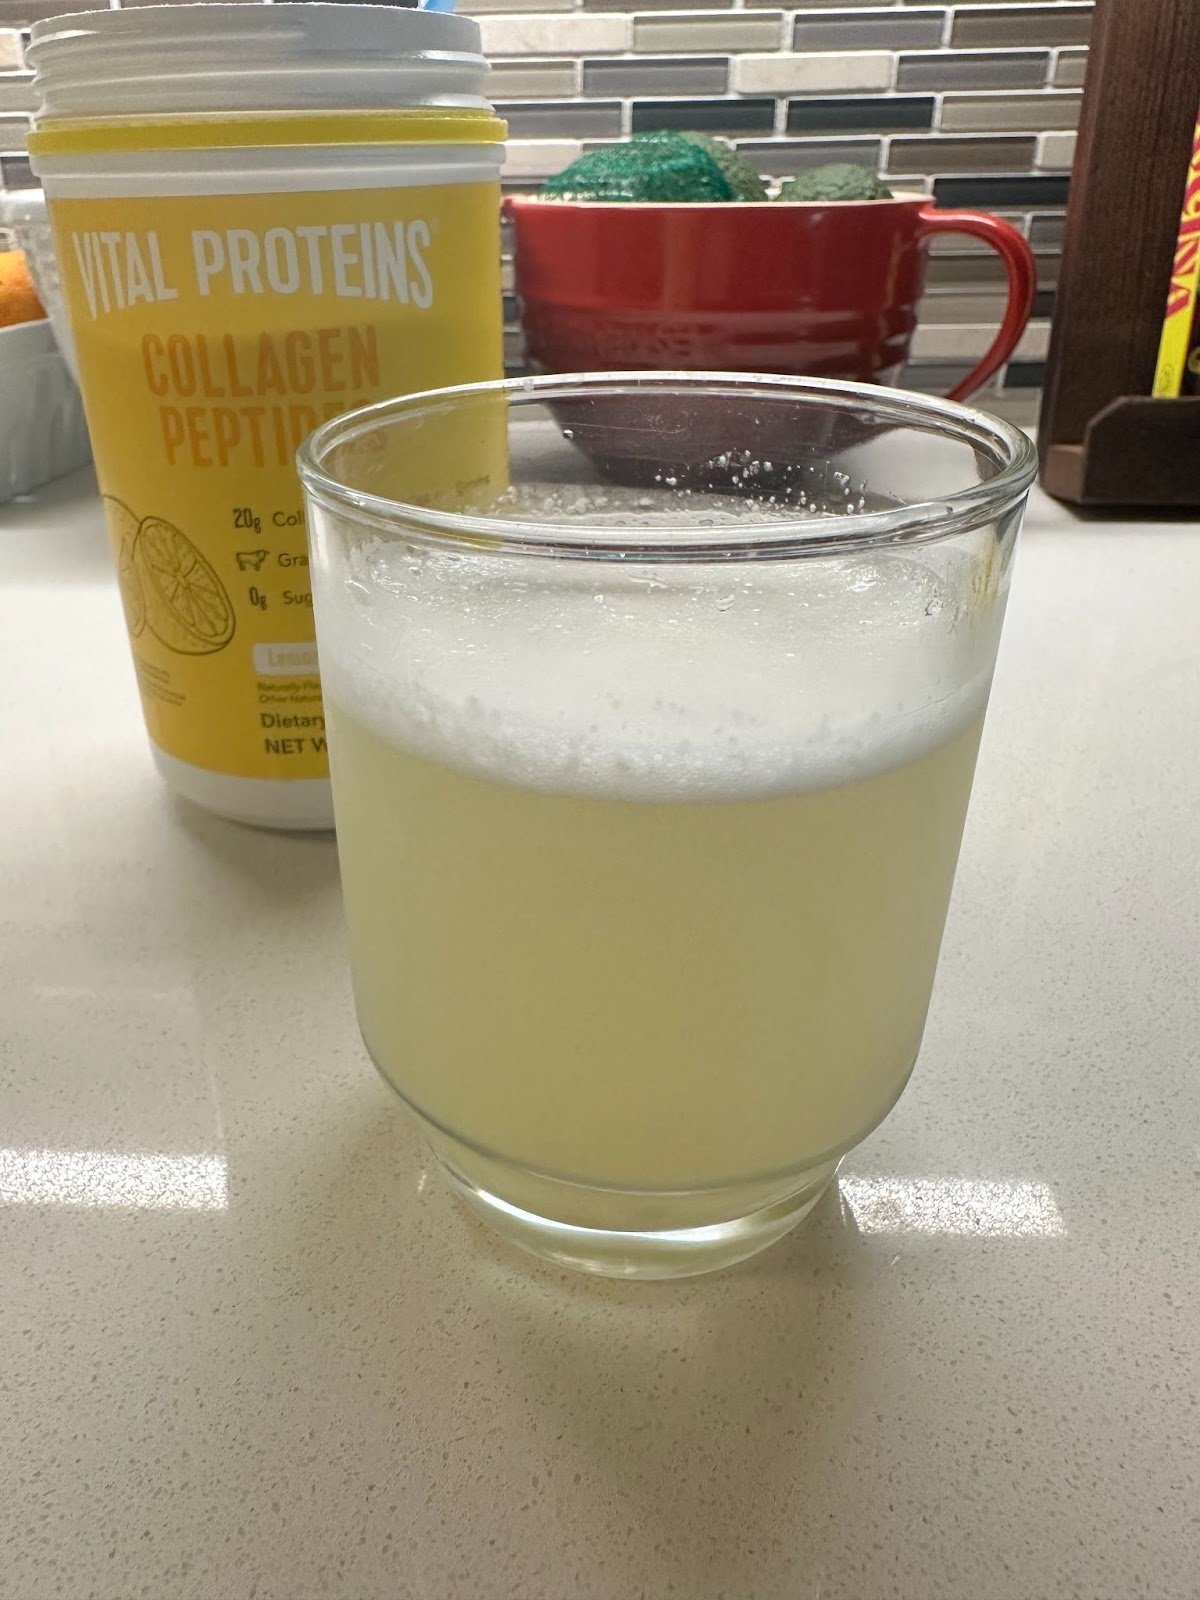 Vital Proteins Lemon Collagen Peptides mixed with water.